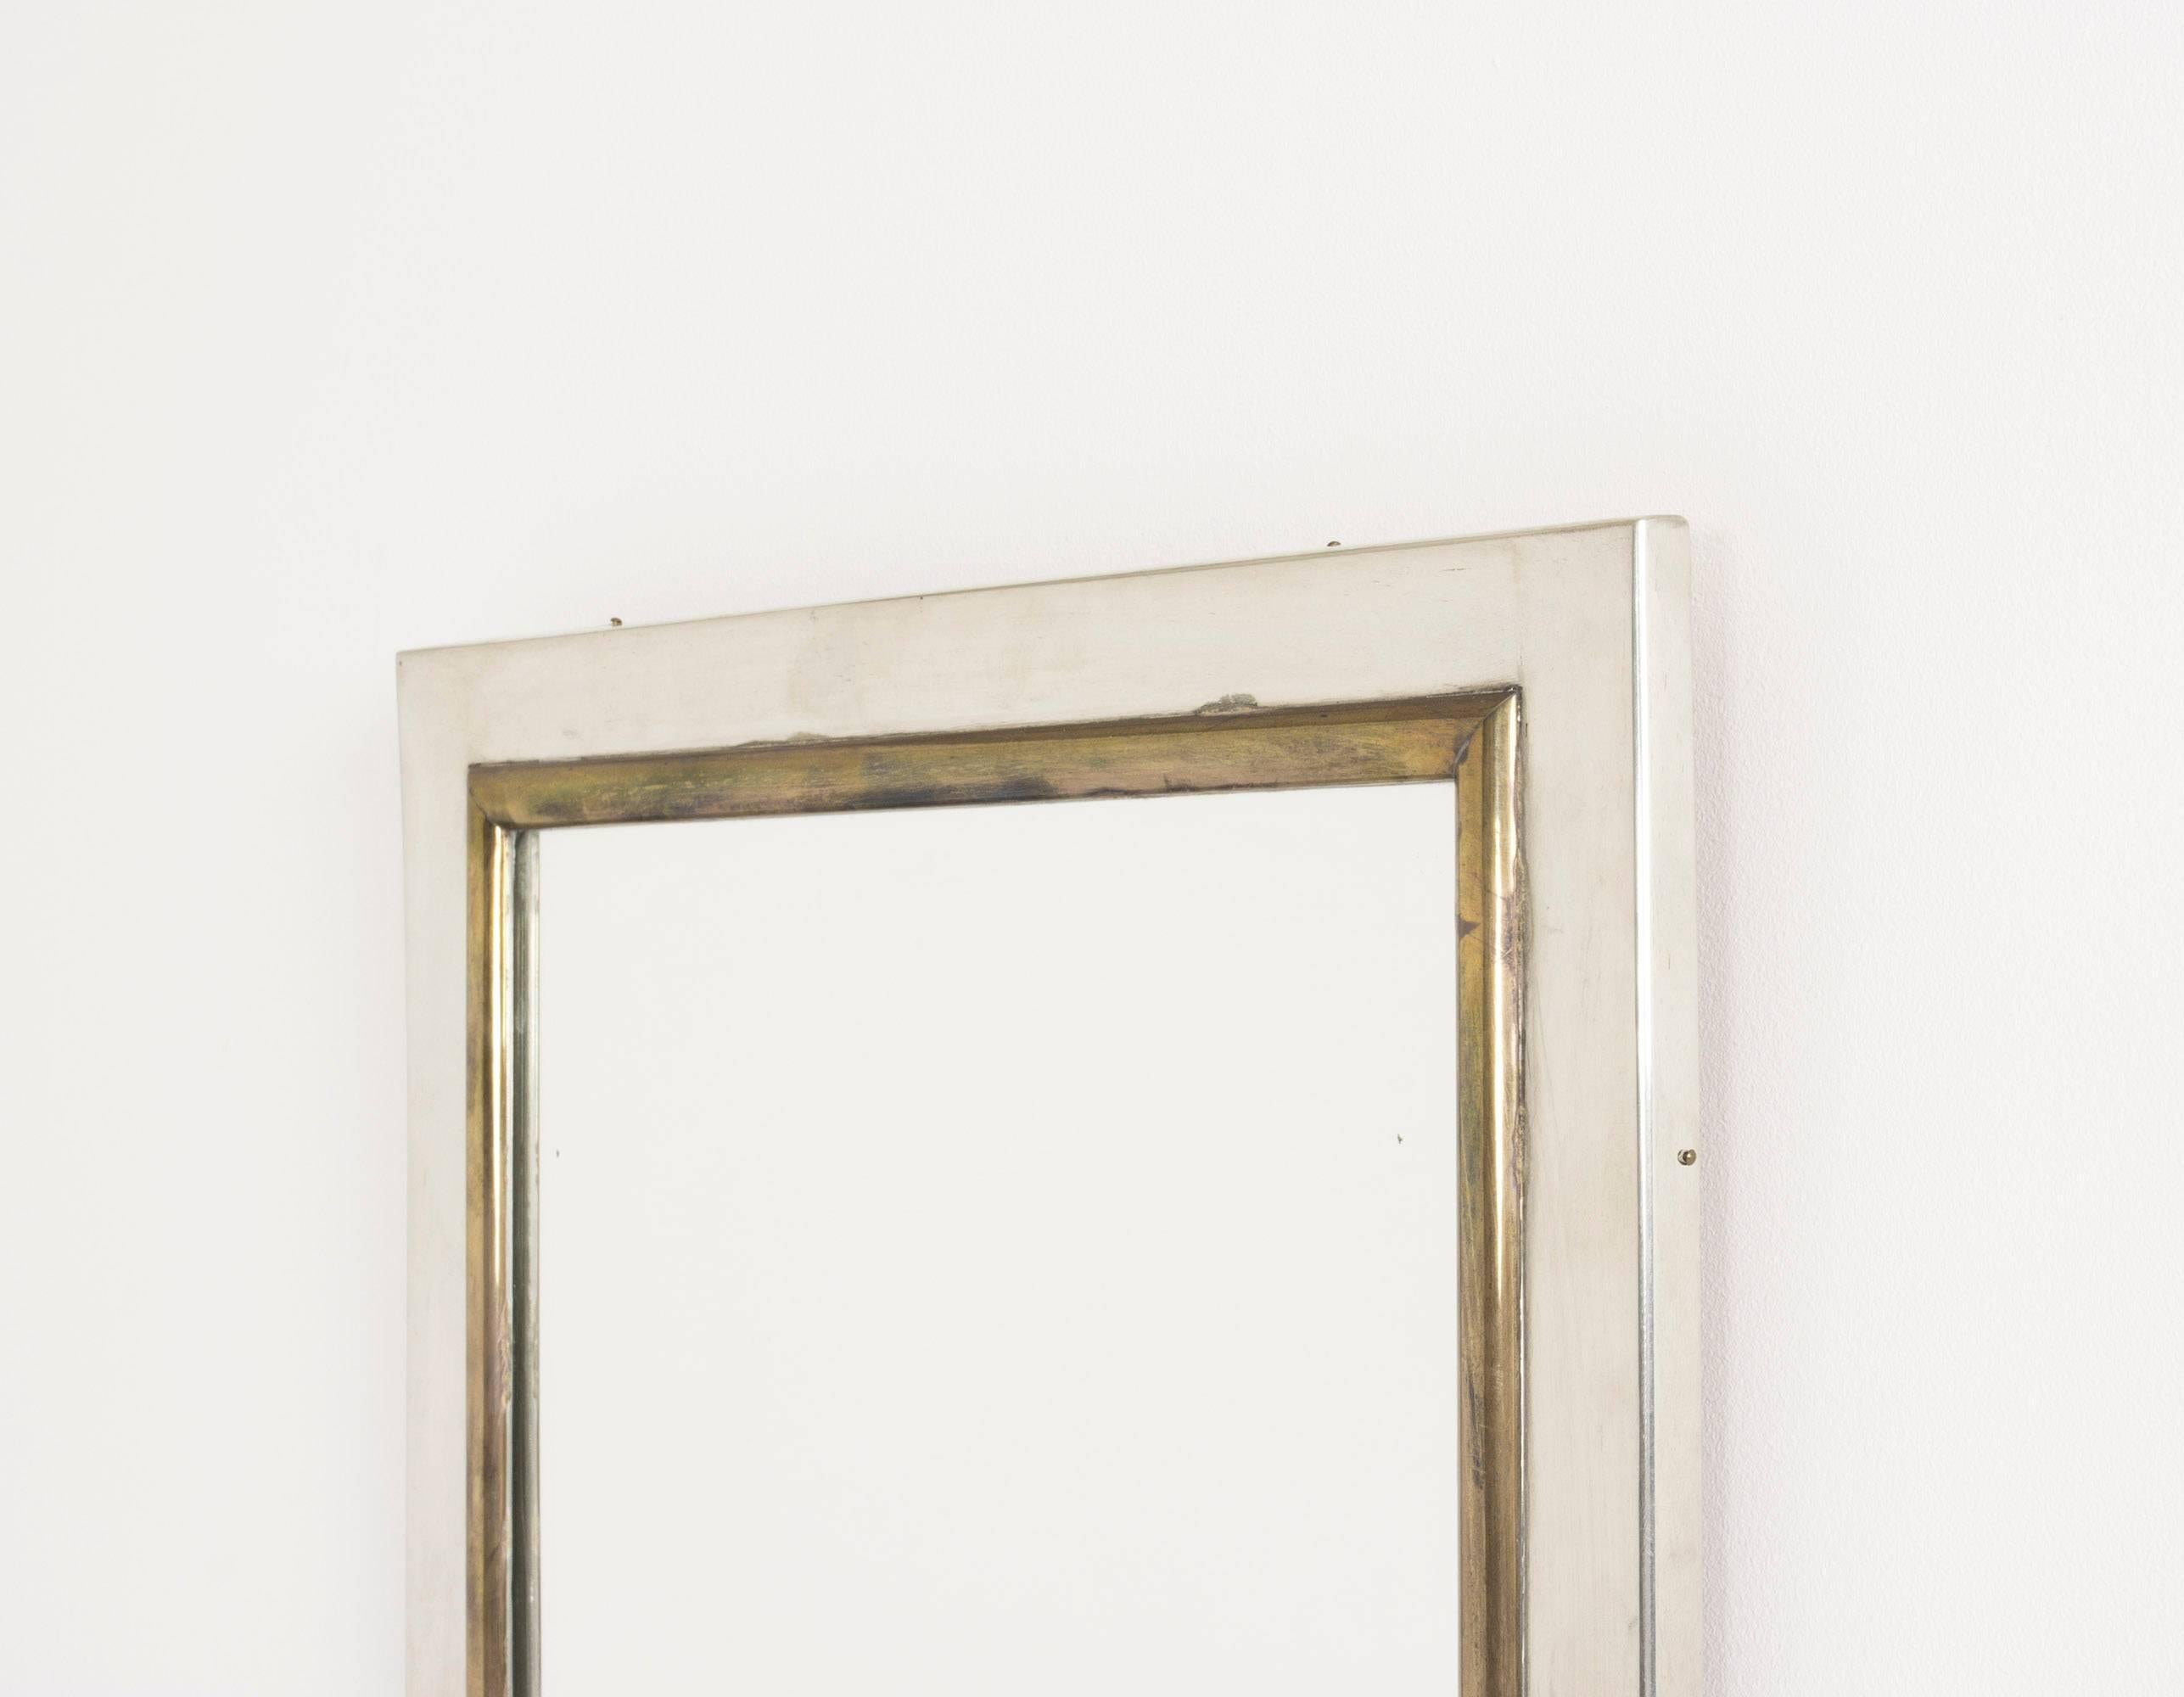 Striking wall mirror by Estrid Ericson with a frame completely dressed in pewter. The inner margins of the mirror are framed with brass for a warm contrast.